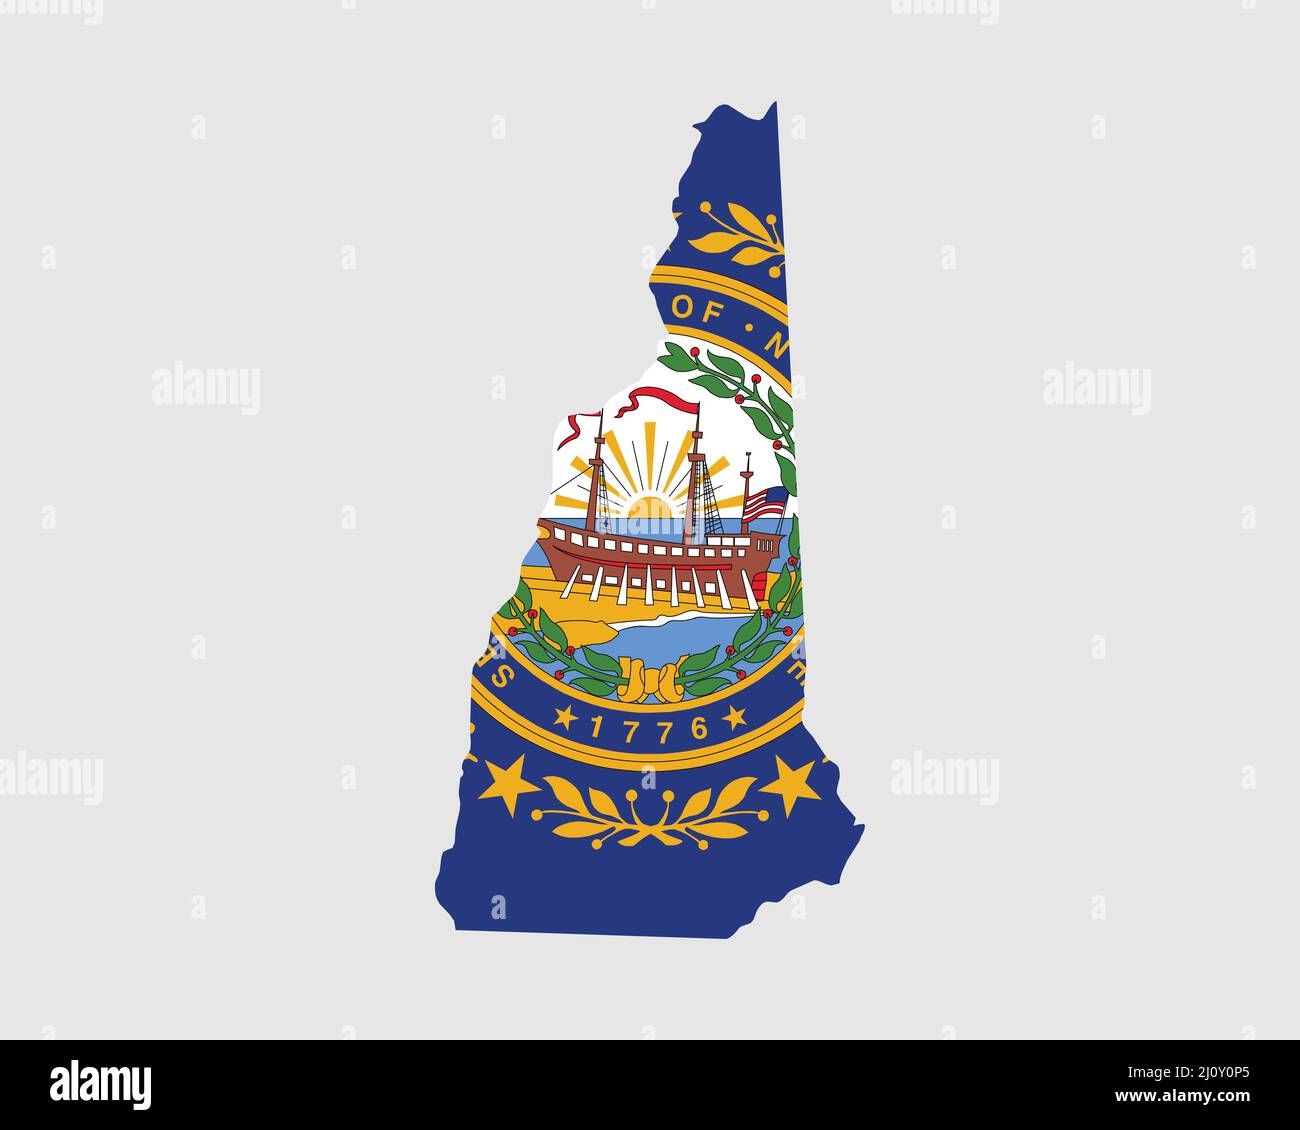 New Hampshire Map Flag. Map of NH, USA with the state flag. United States, America, American, United States of America, US State Banner. Vector illust Stock Vector